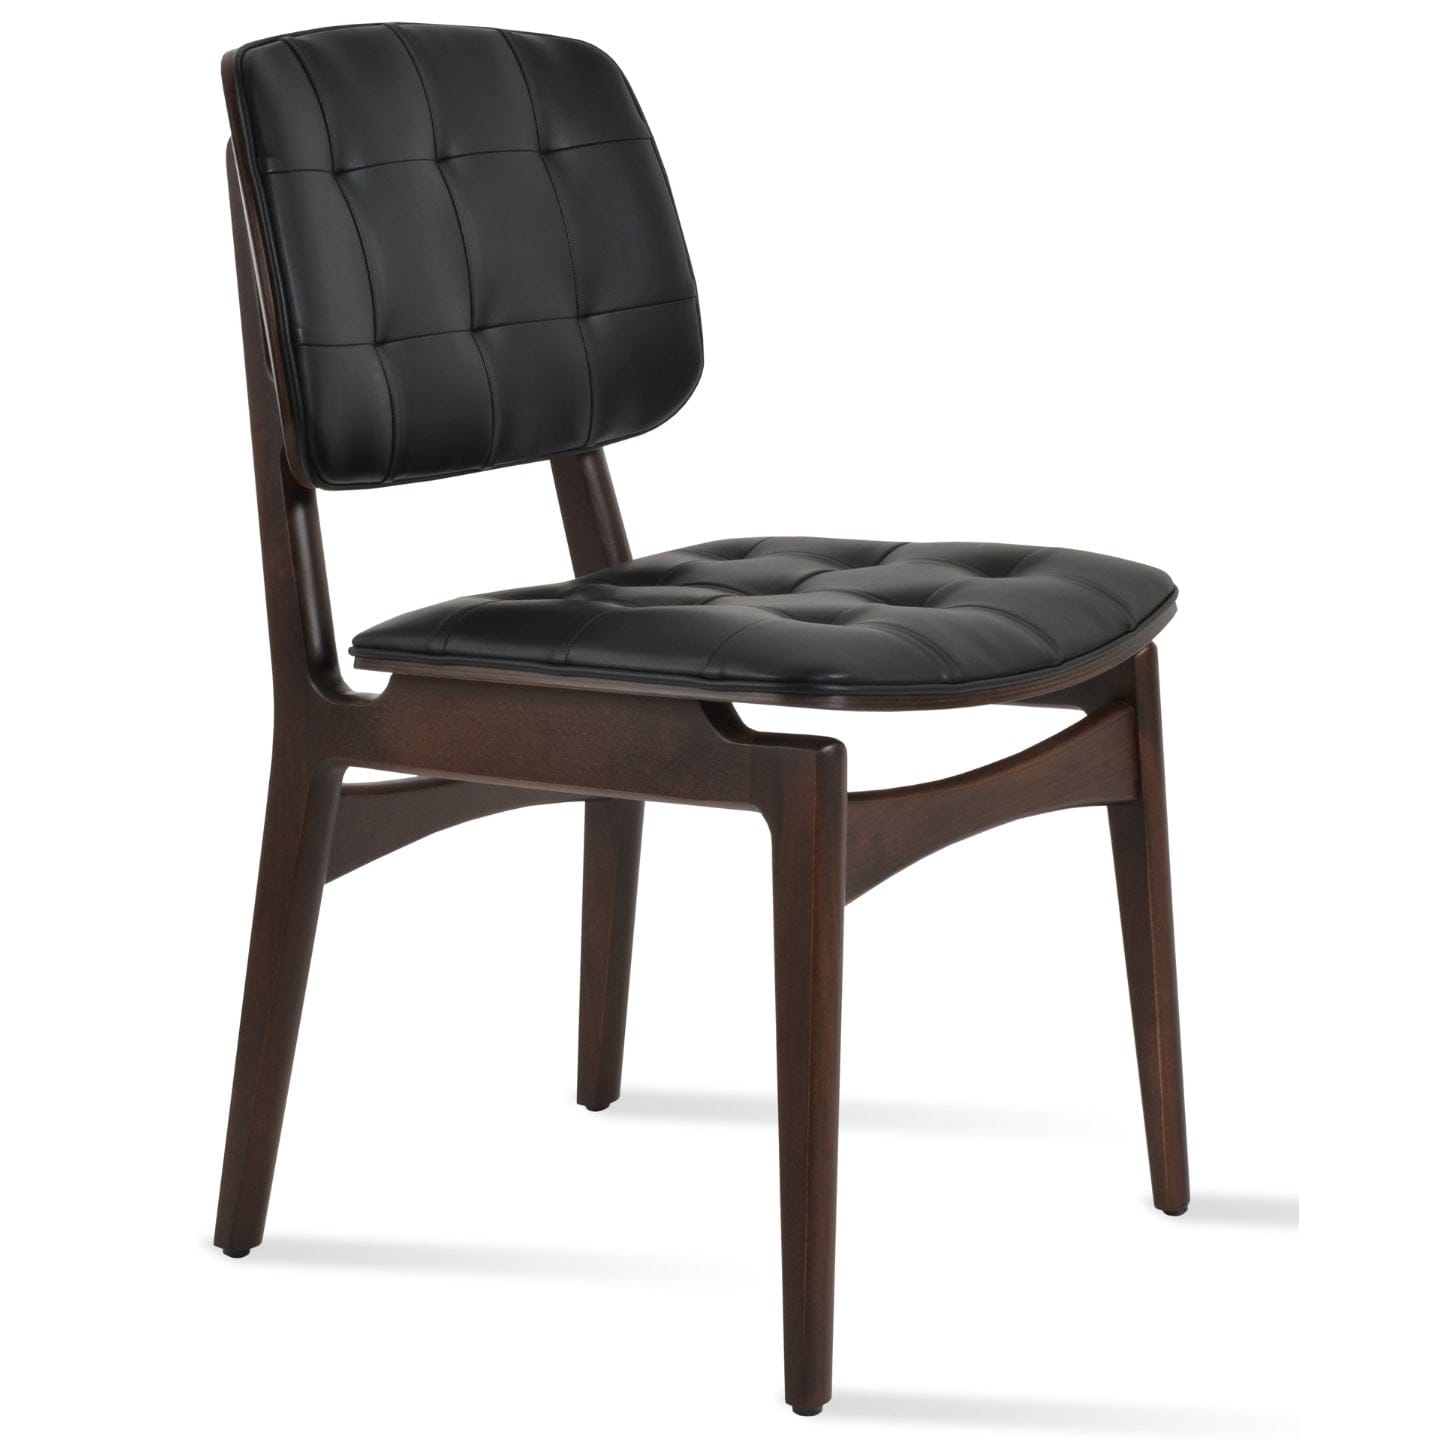 sohoConcept Kitchen & Dining Room Chairs Valencia Tufted Upholstered Chair | Black Leather Wood Dining Chair